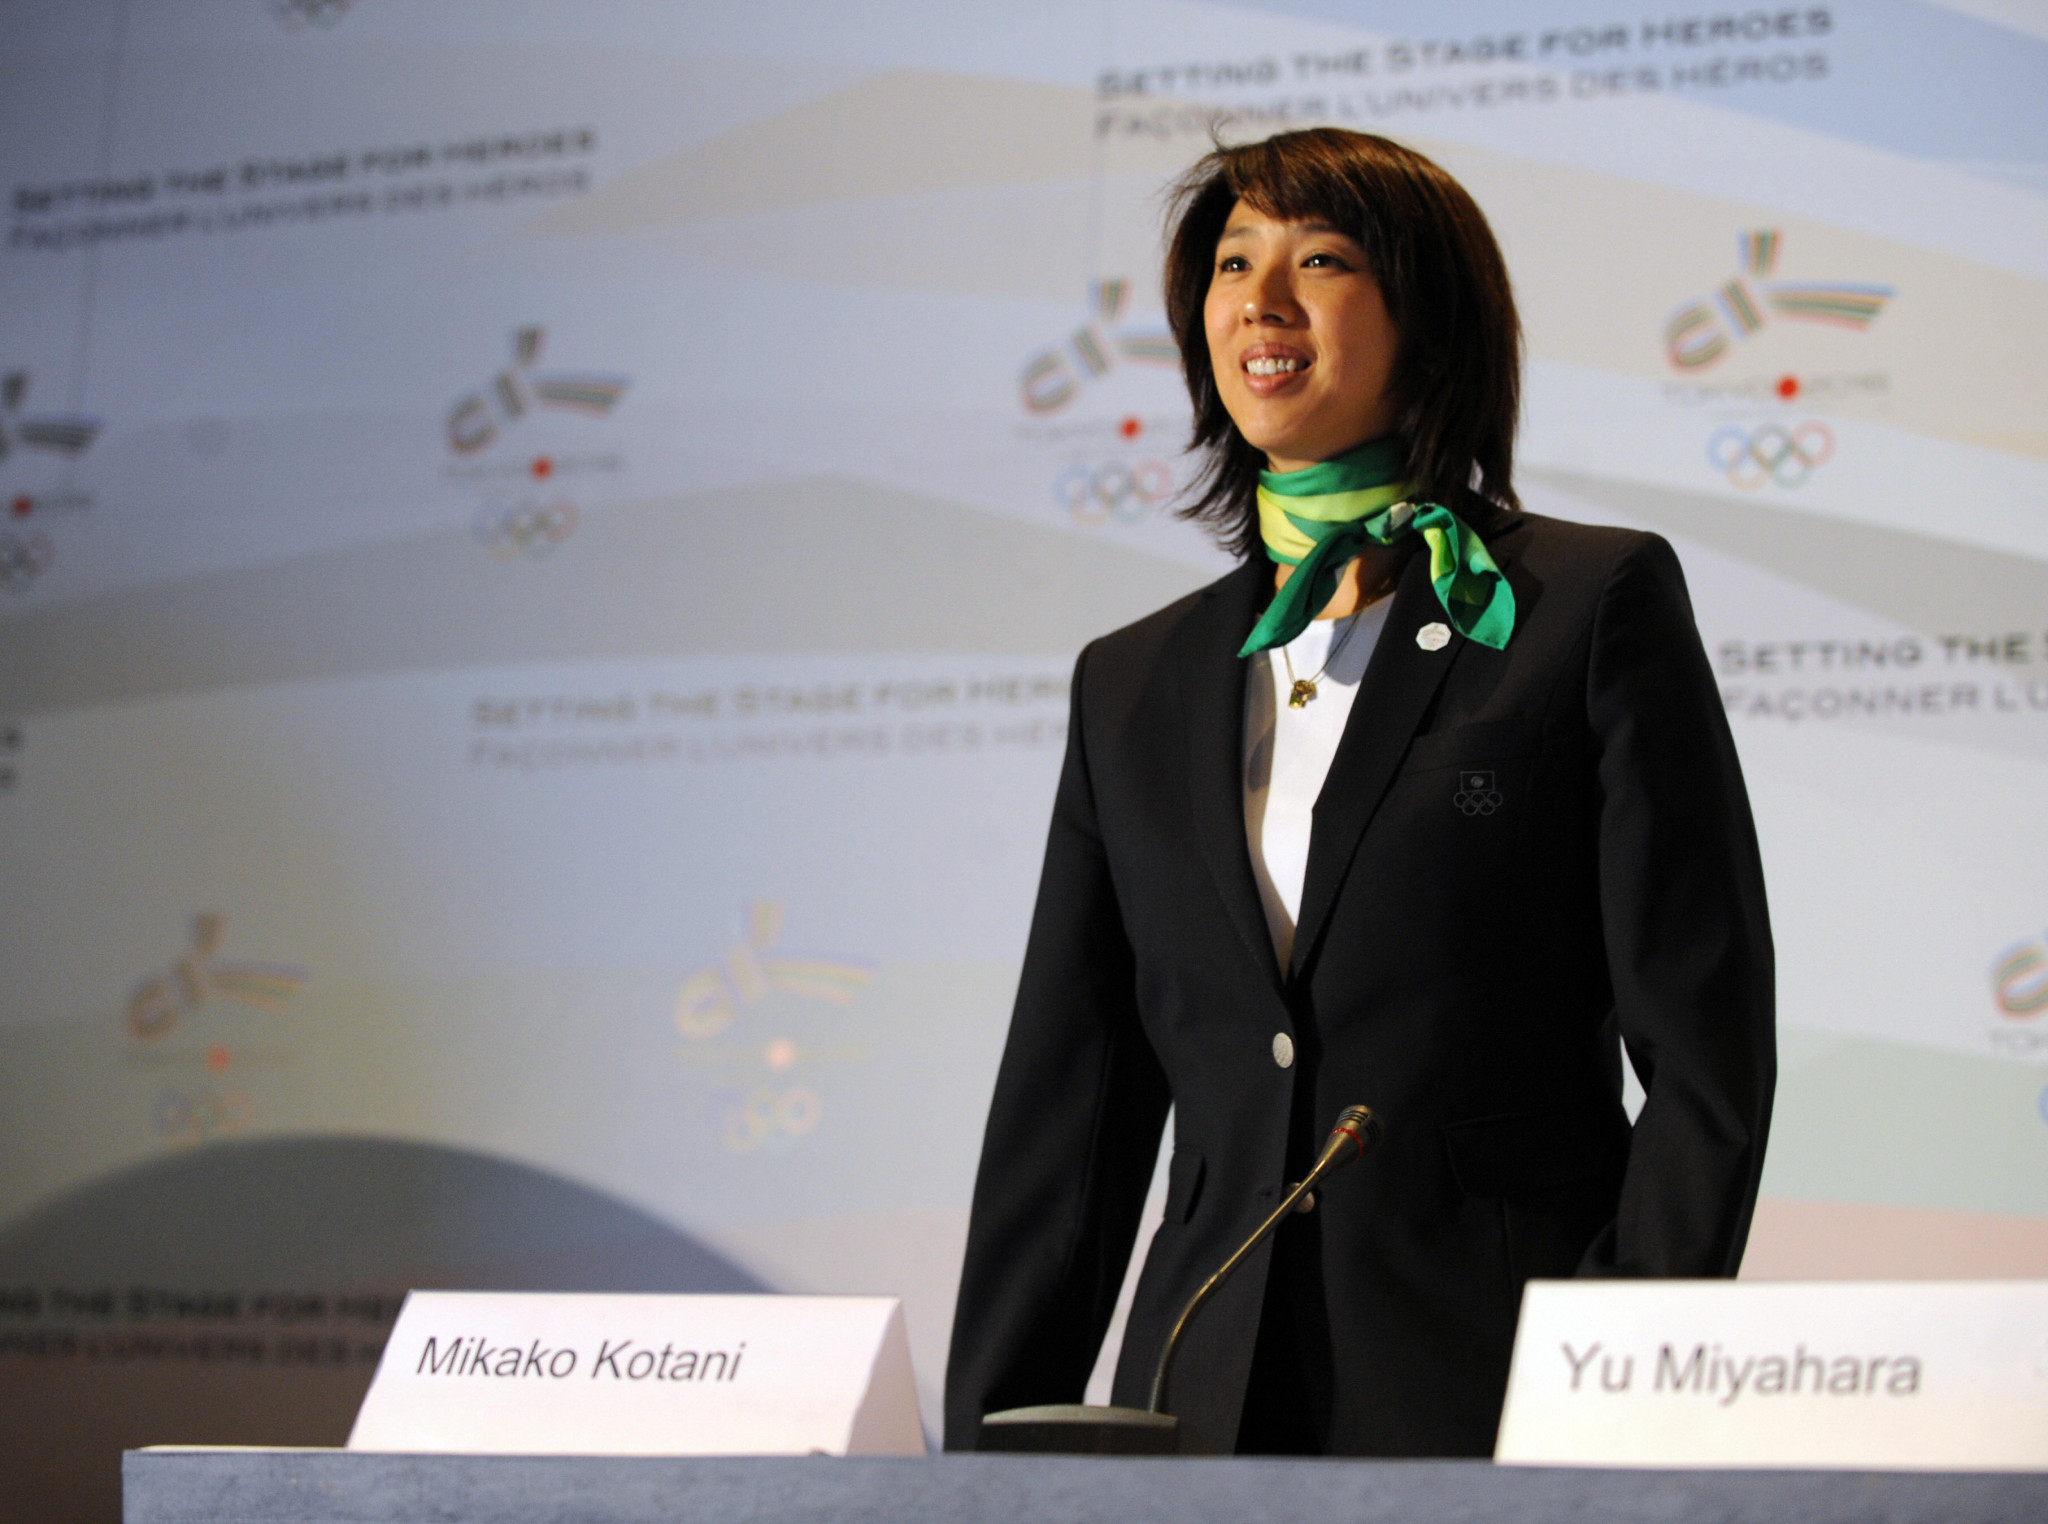 New Tokyo 2020 sports director Mikako Kotani said she will ensure the Games go ahead safely ©Getty Images